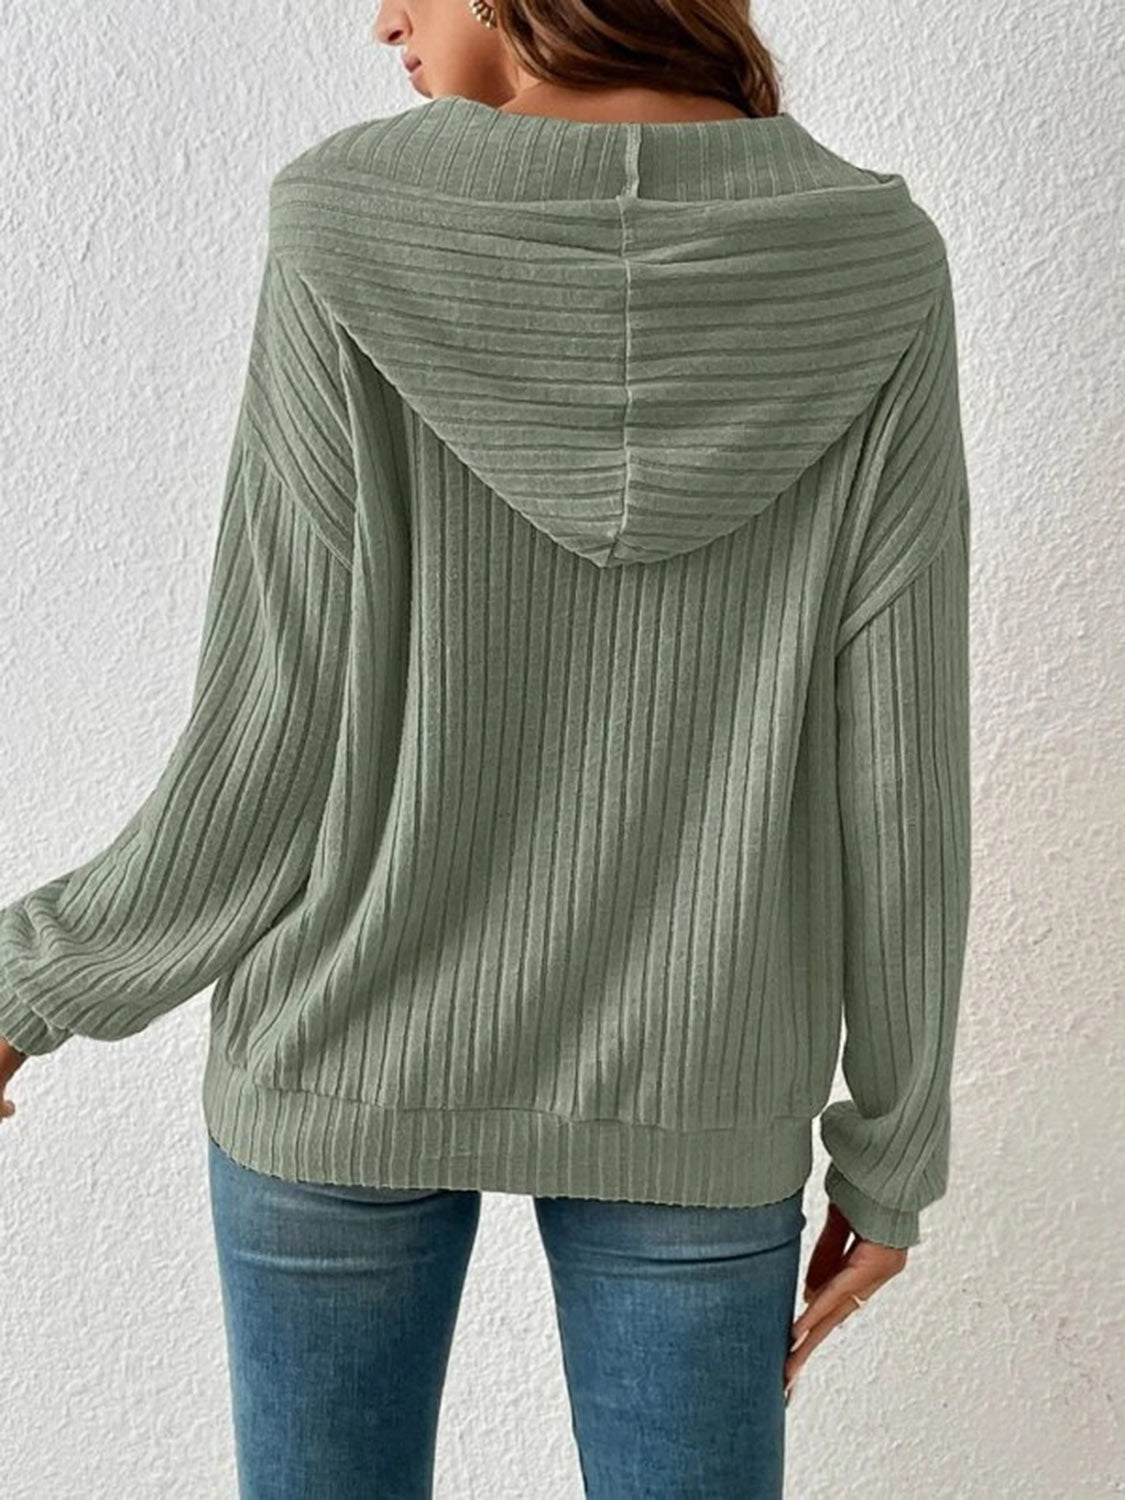 Ribbed Dropped Shoulder Drawstring Hoodie - Women’s Clothing & Accessories - Shirts & Tops - 7 - 2024